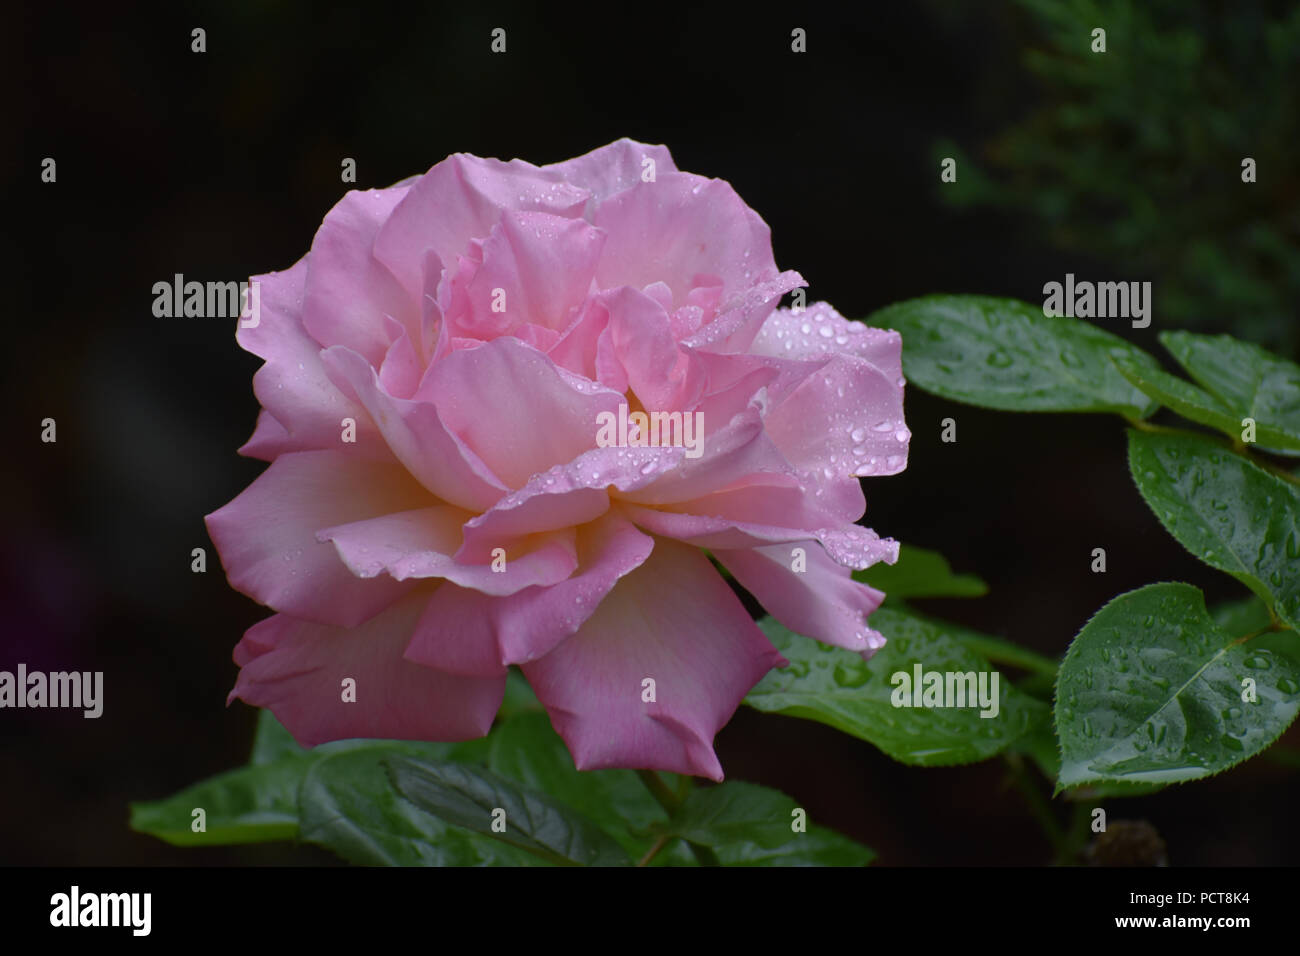 Raindrops on large pink rose with dark green leaves in a dark background Stock Photo